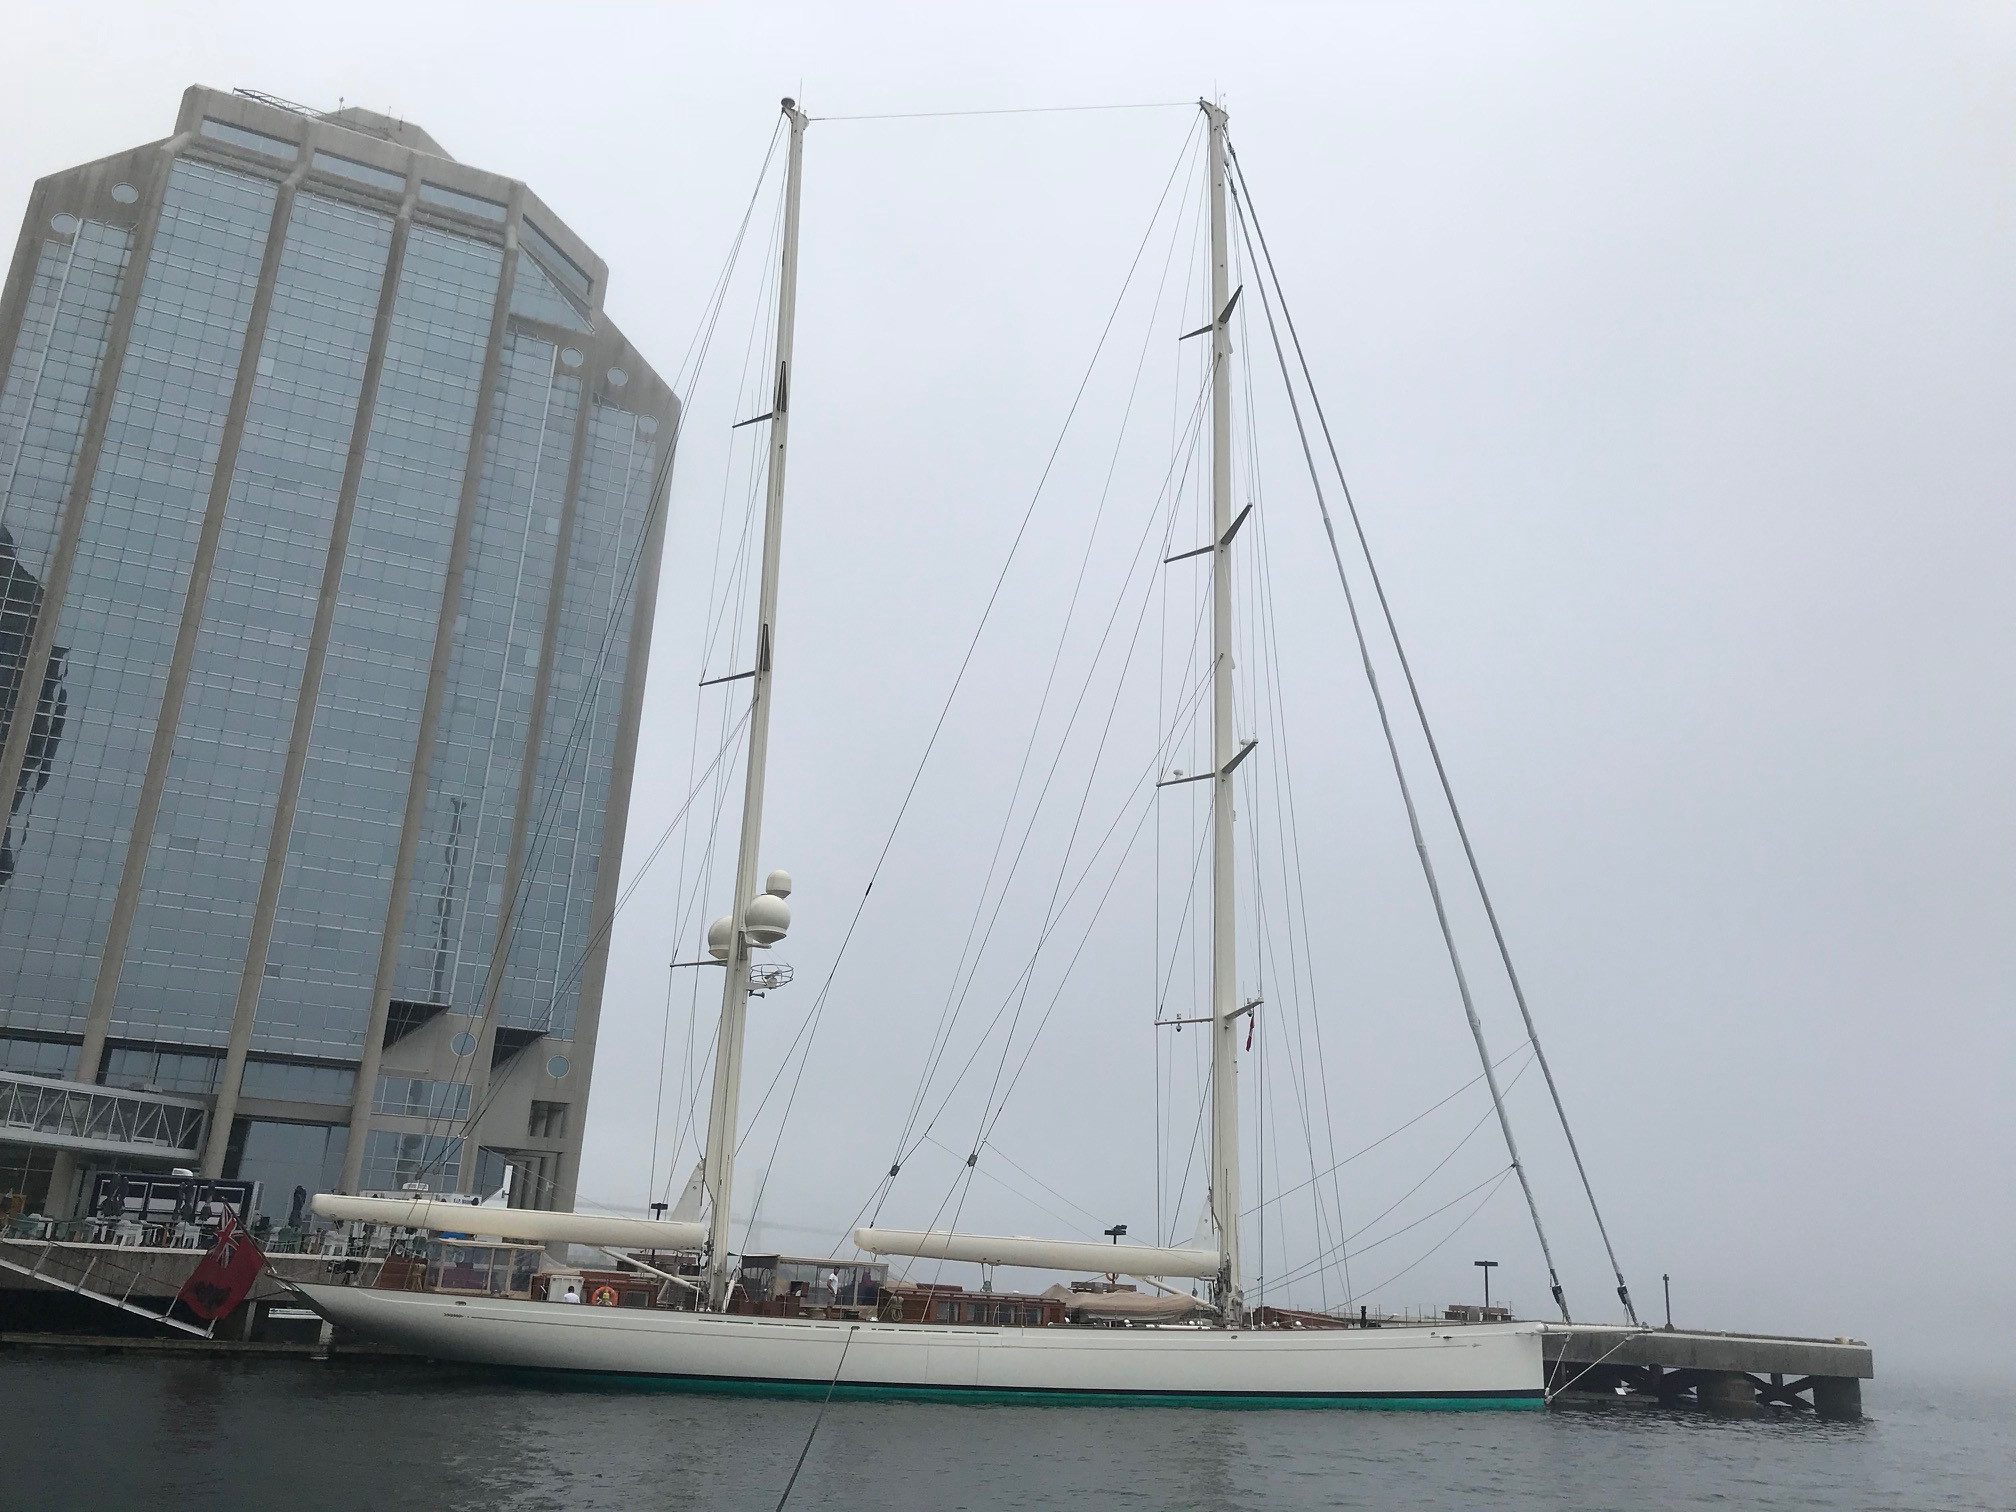 Top 10 Yachts to Visit Halifax